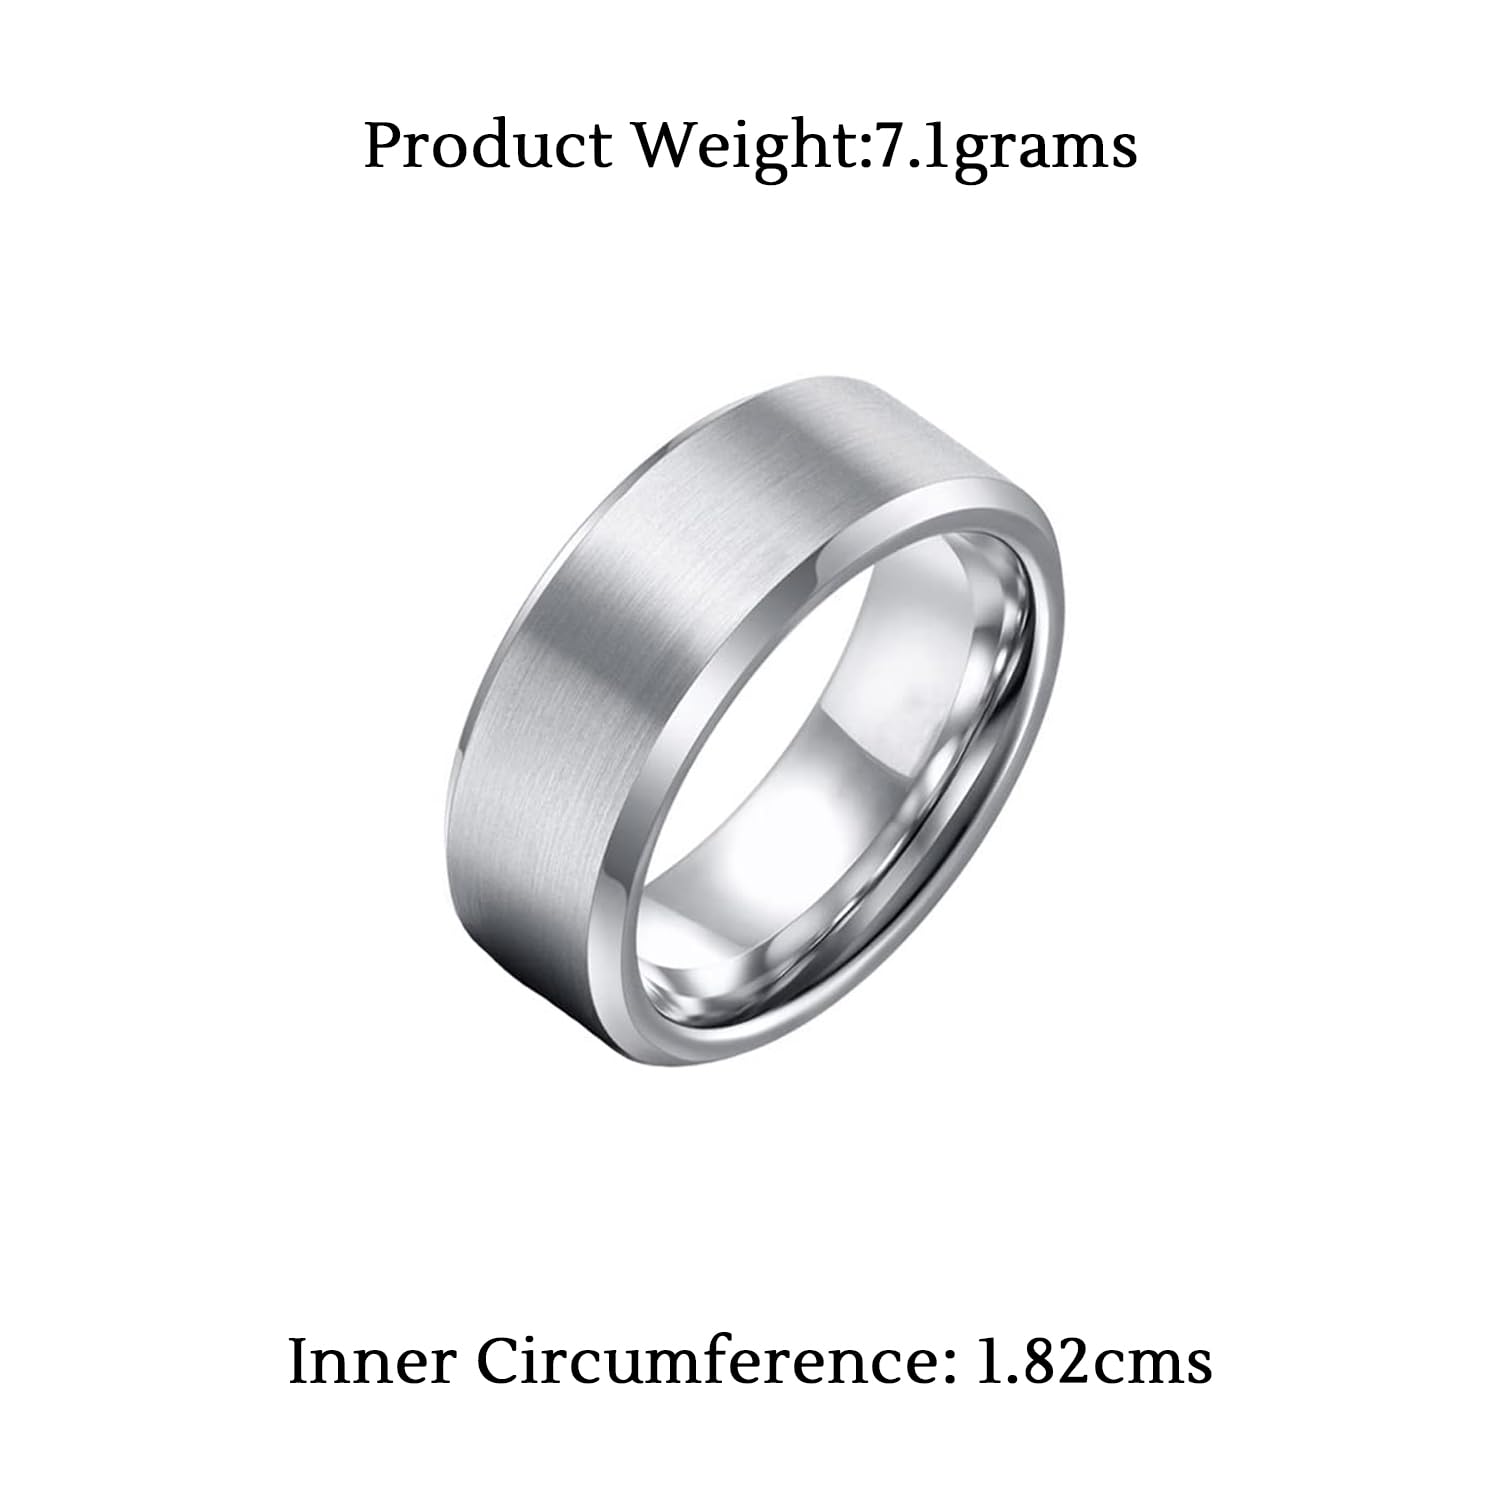 Buy Silver-Toned Rings for Men by Yellow Chimes Online